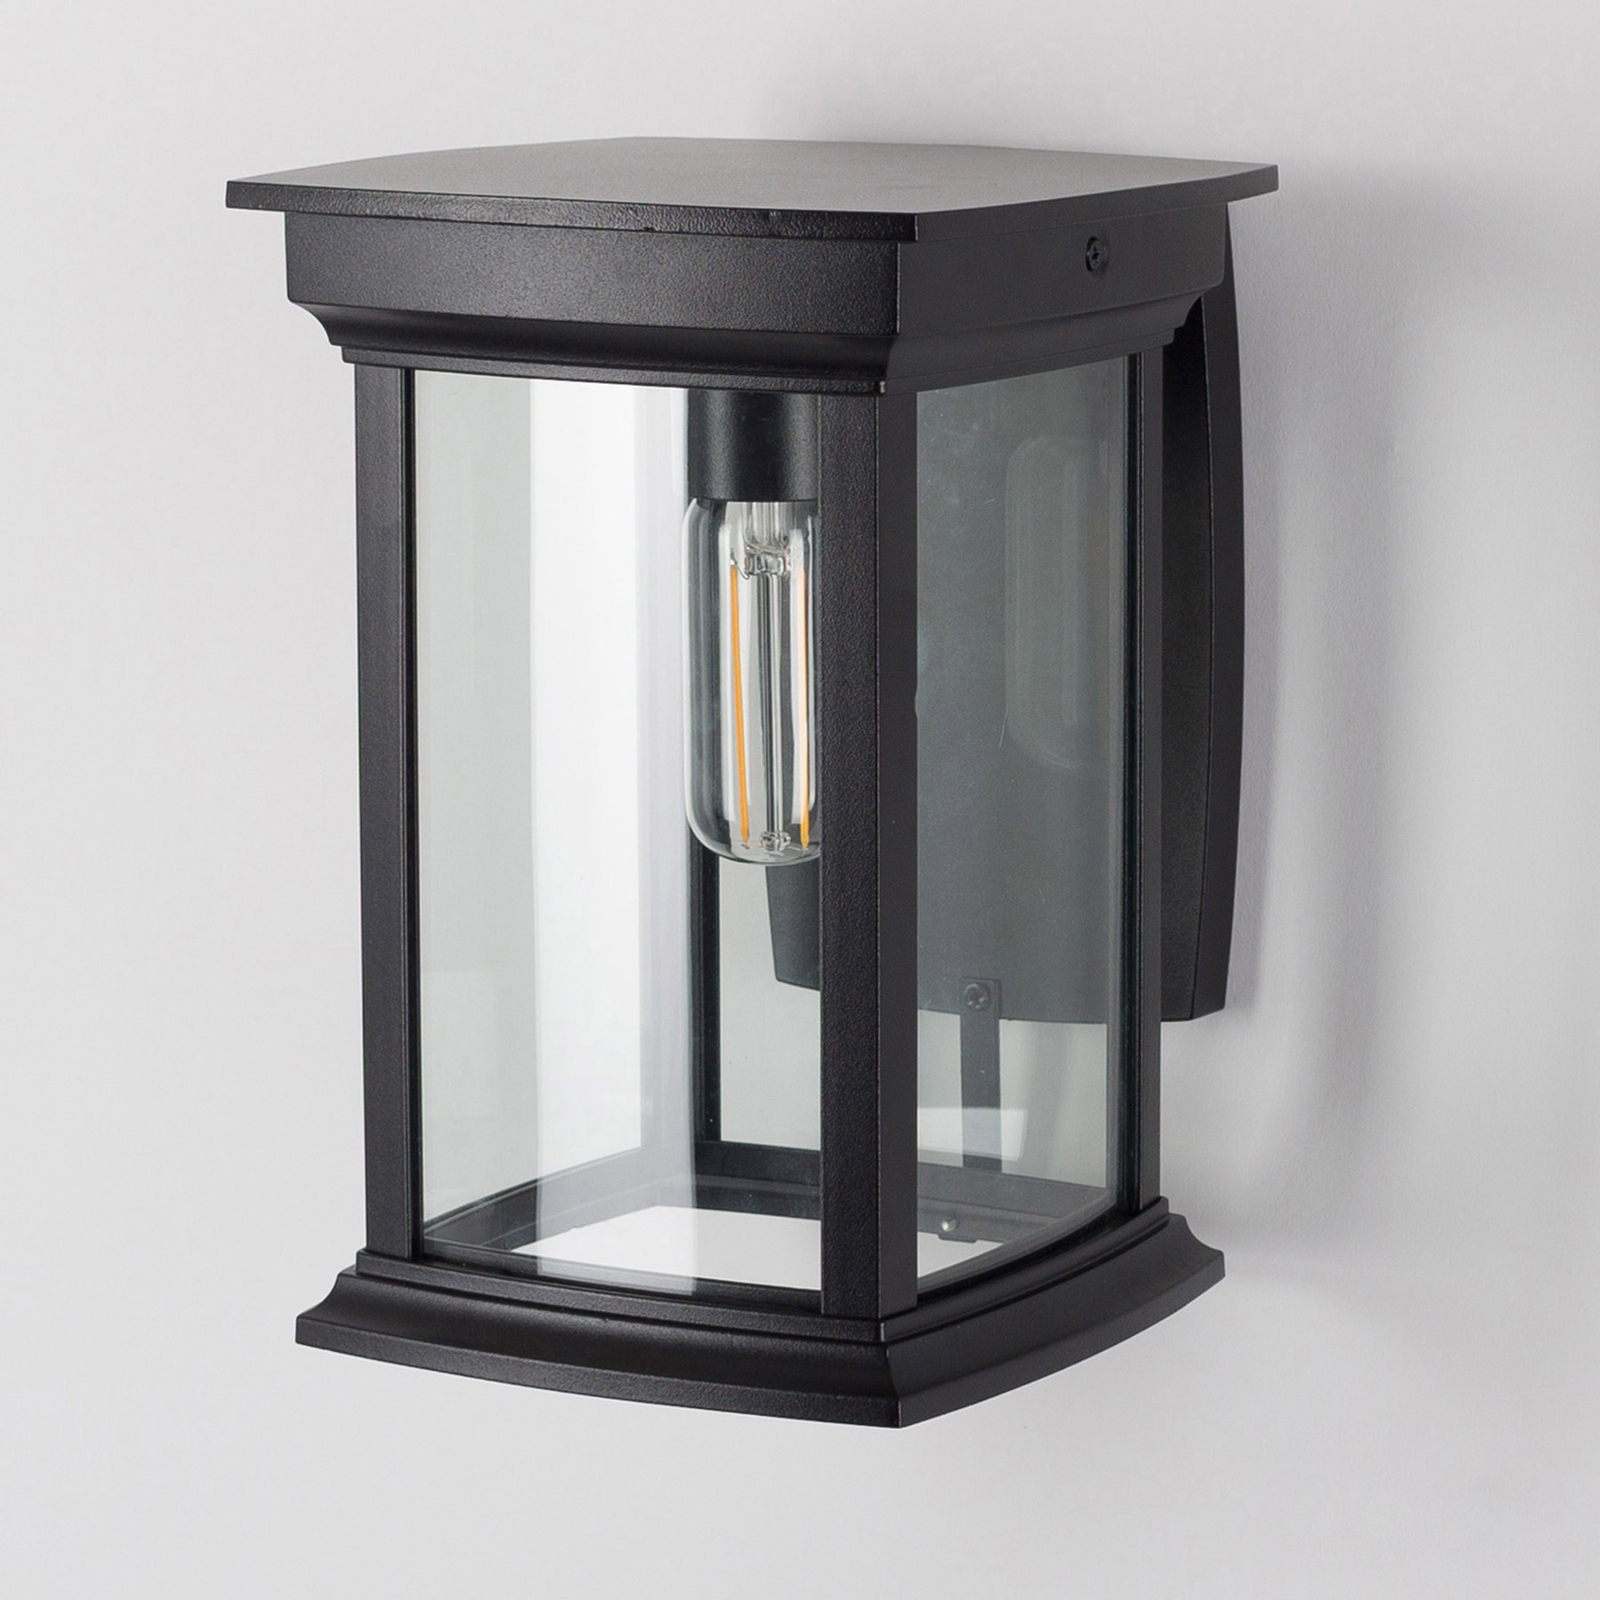 Carlton outdoor wall light with glass shade